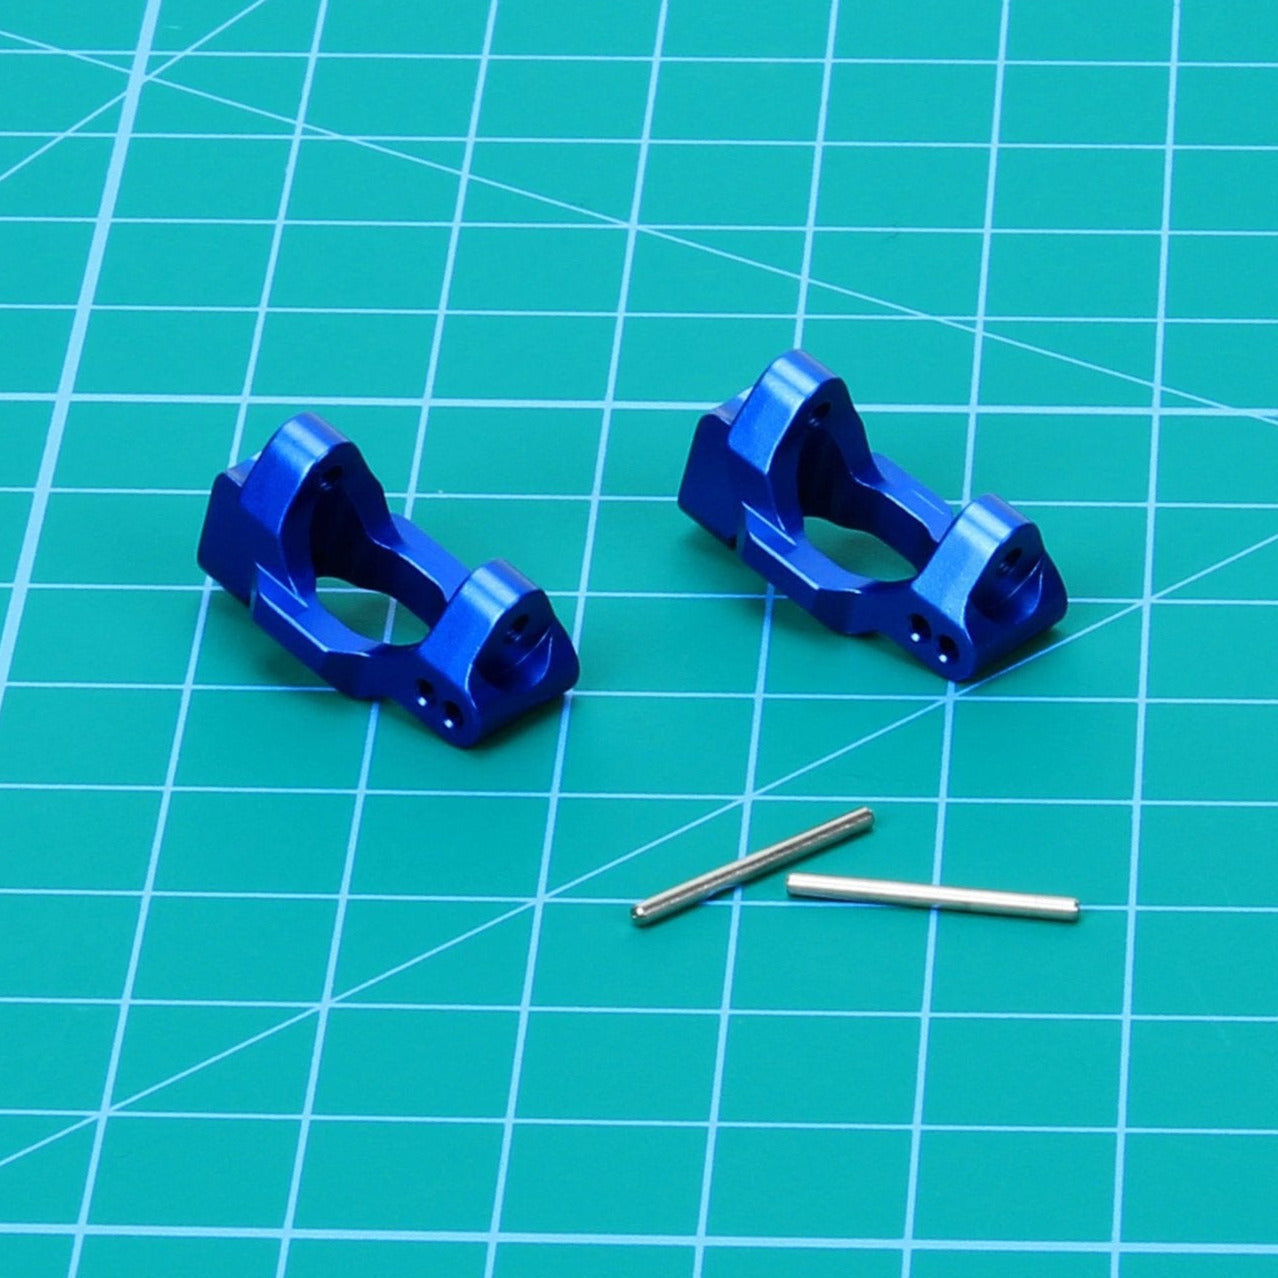 RCAWD TRAXXAS SLASH Blue RCAWD RC Aluminum Caster blocks (c-hubs) 2pcs for 1/18 Traxxas Upgrade Parts